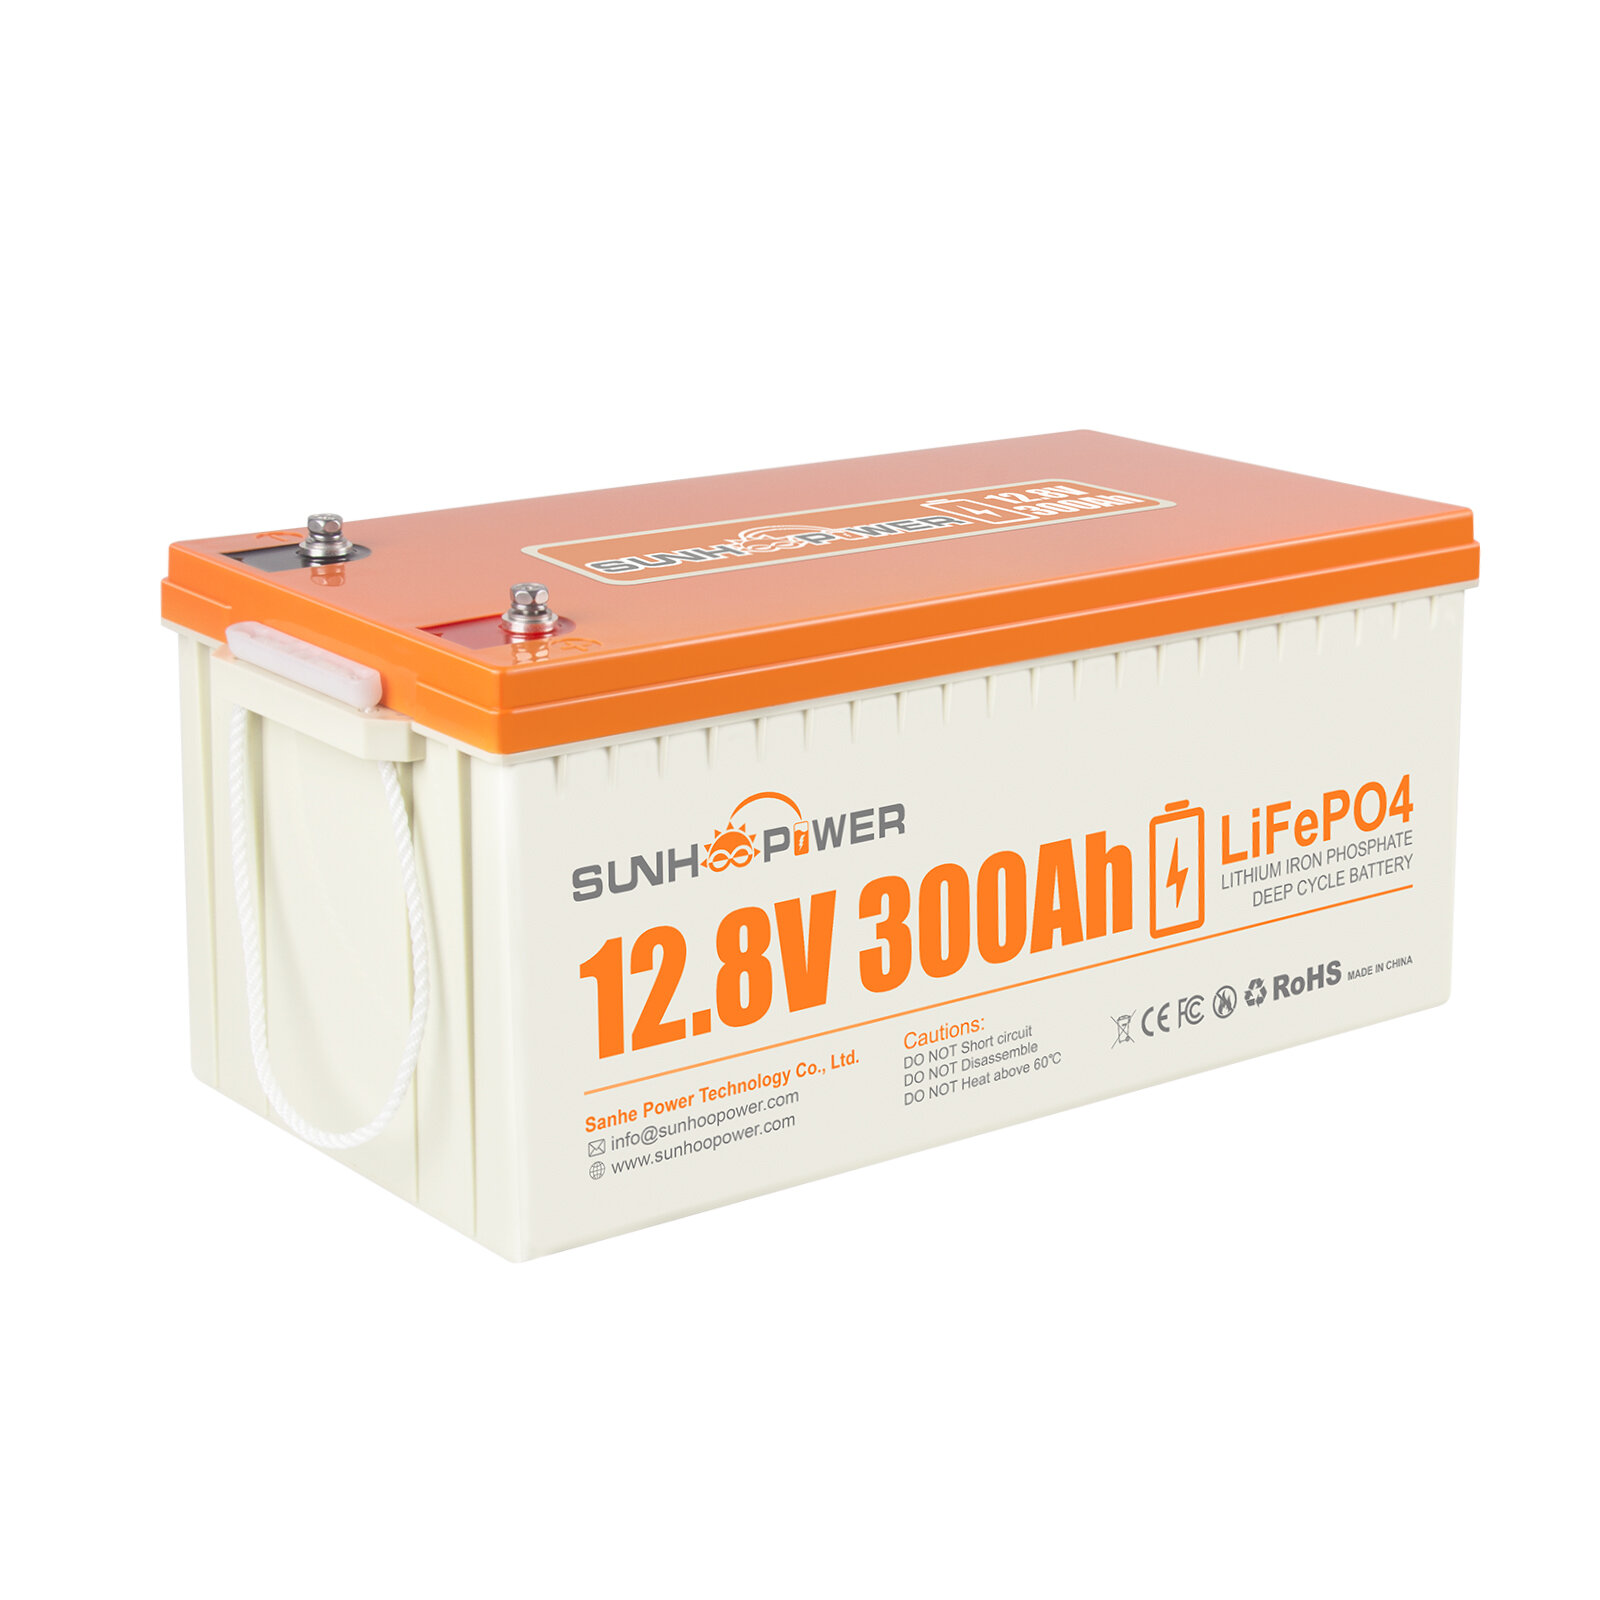 [EU Direct] SUNHOOPOWER 12V 300AH LiFePO4 Battery, 2560Wh Rechargeable Lithium Battery Built-in 200A BMS, Self-Discharge, Perfect for RV, Marine, Energy Storage,Off-Grid Backup Power